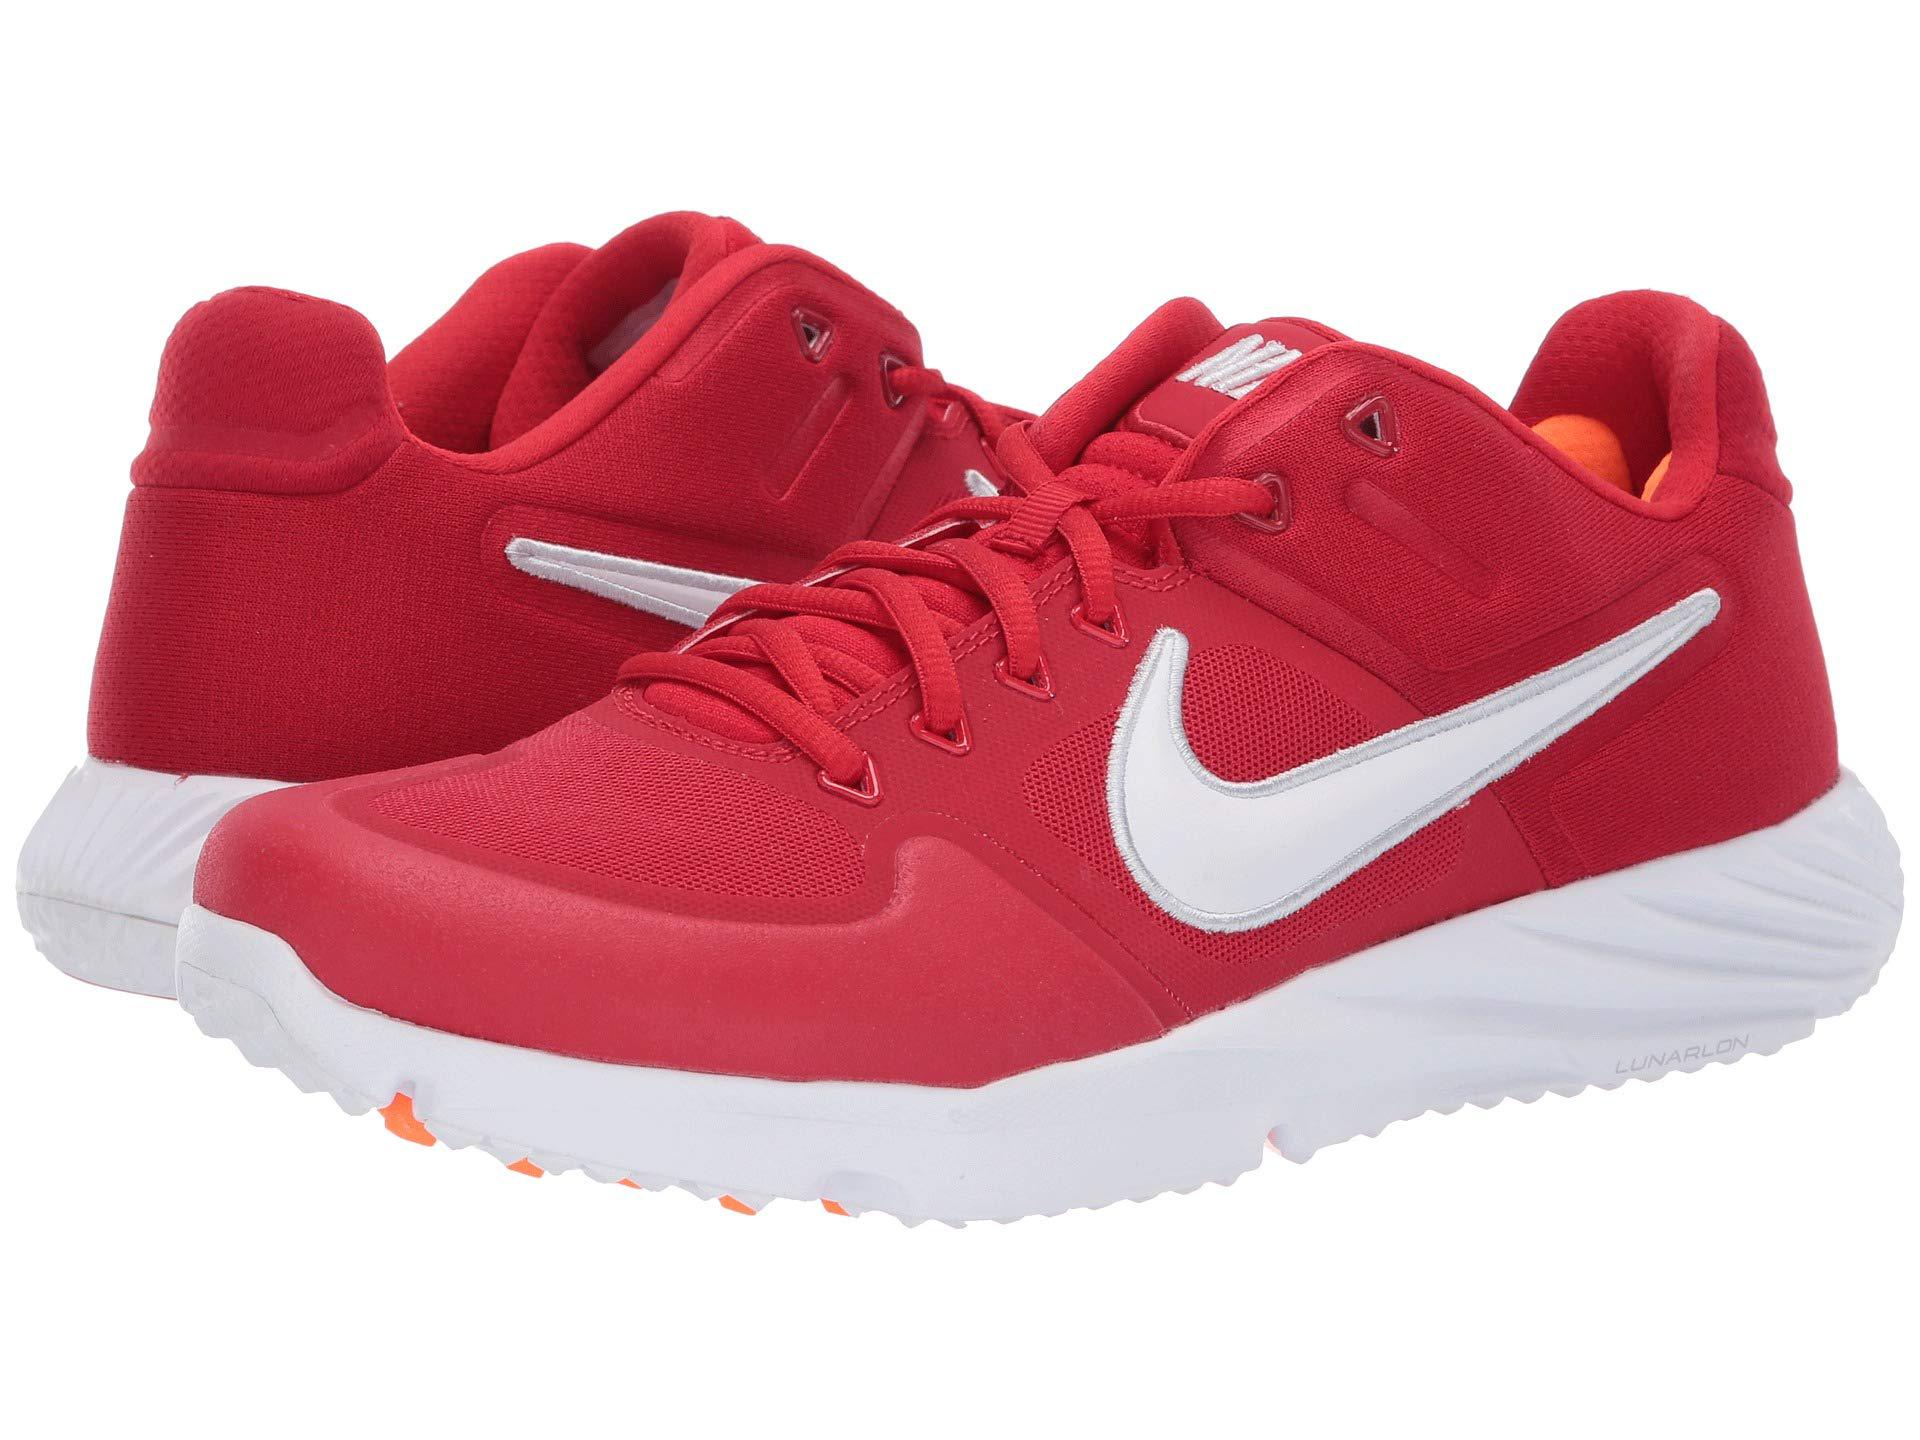 red nike turf shoes